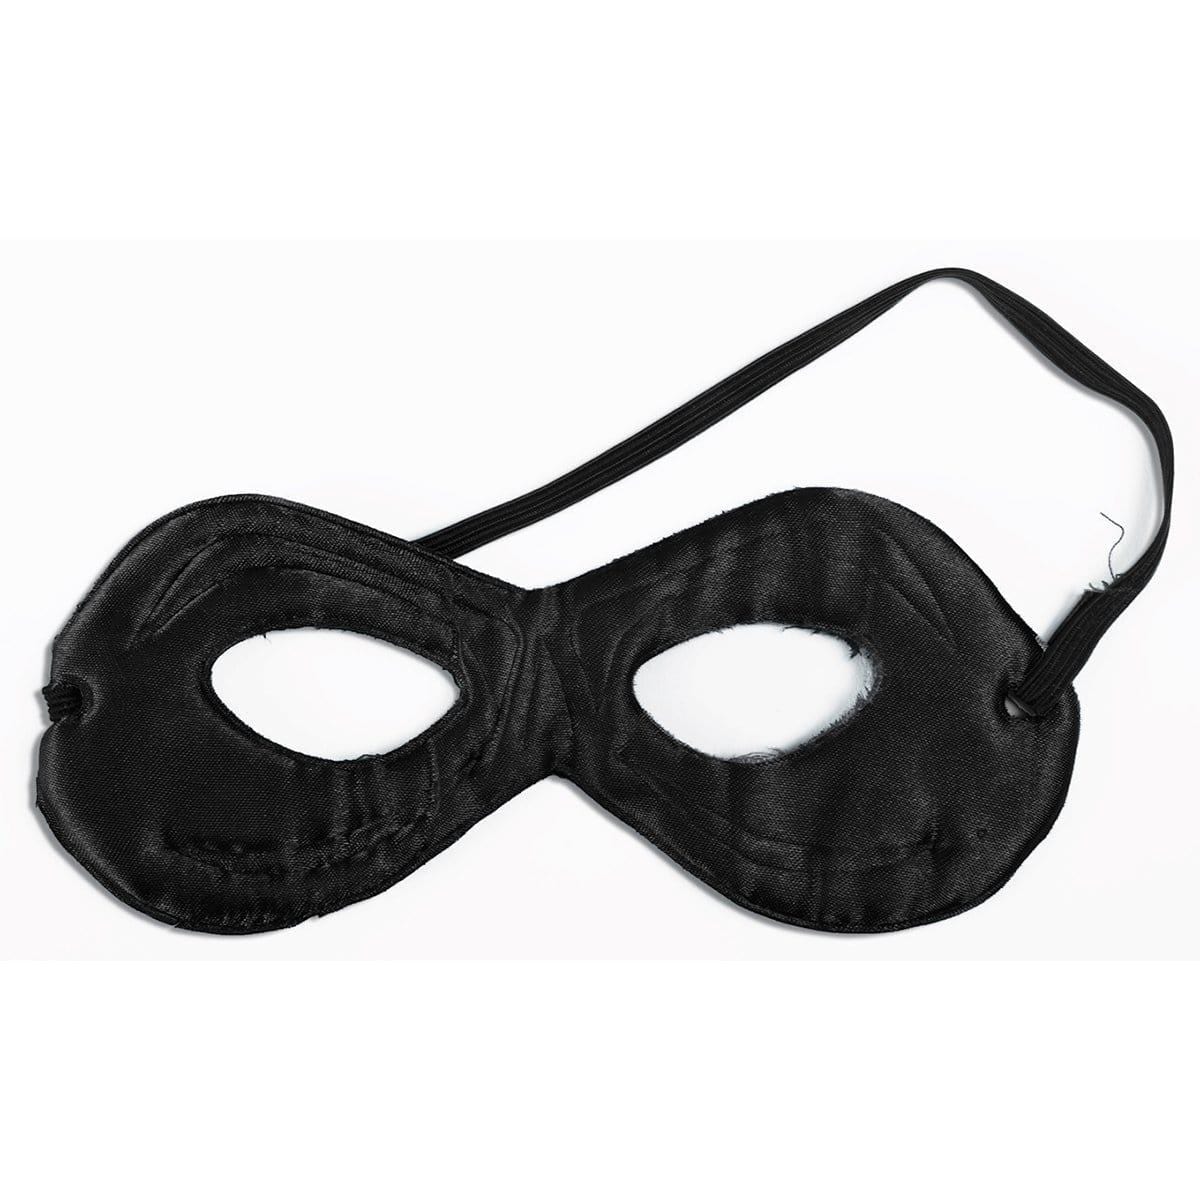 Buy Costume Accessories Black & red reversible eyemask for kids sold at Party Expert